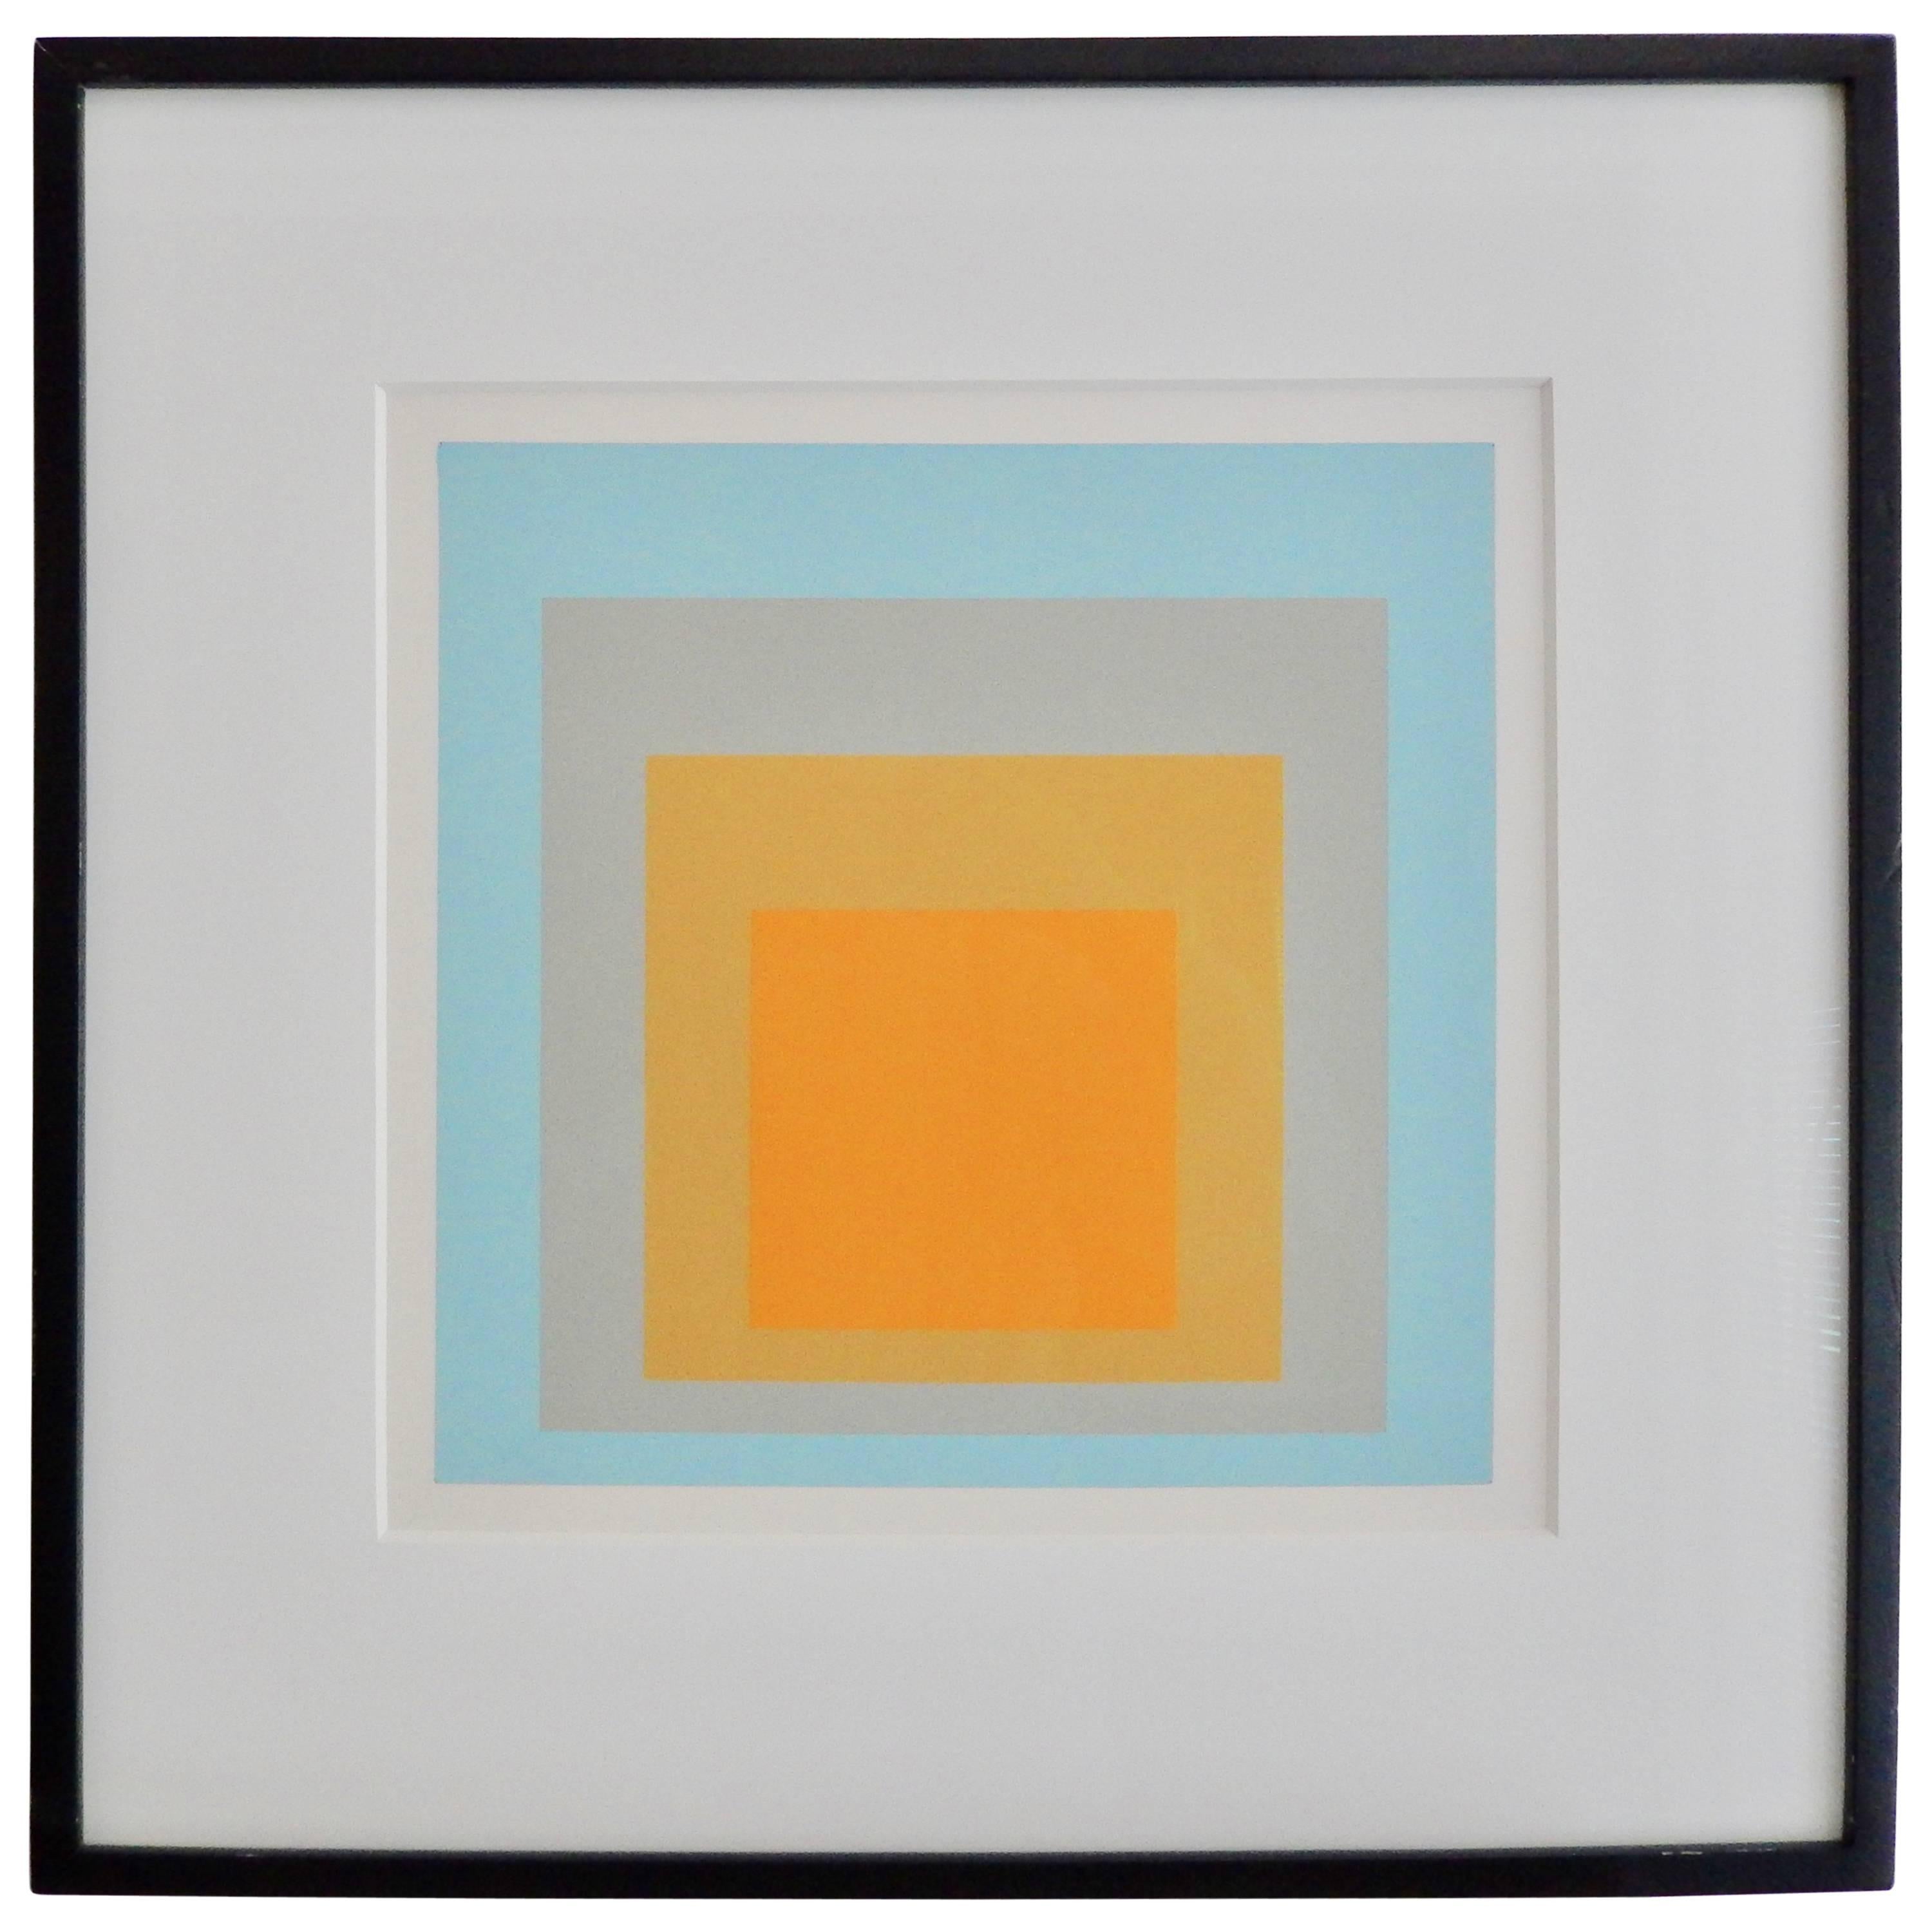 Josef Albers, "Wide Light" Homage to the Square Screen Print, 1962